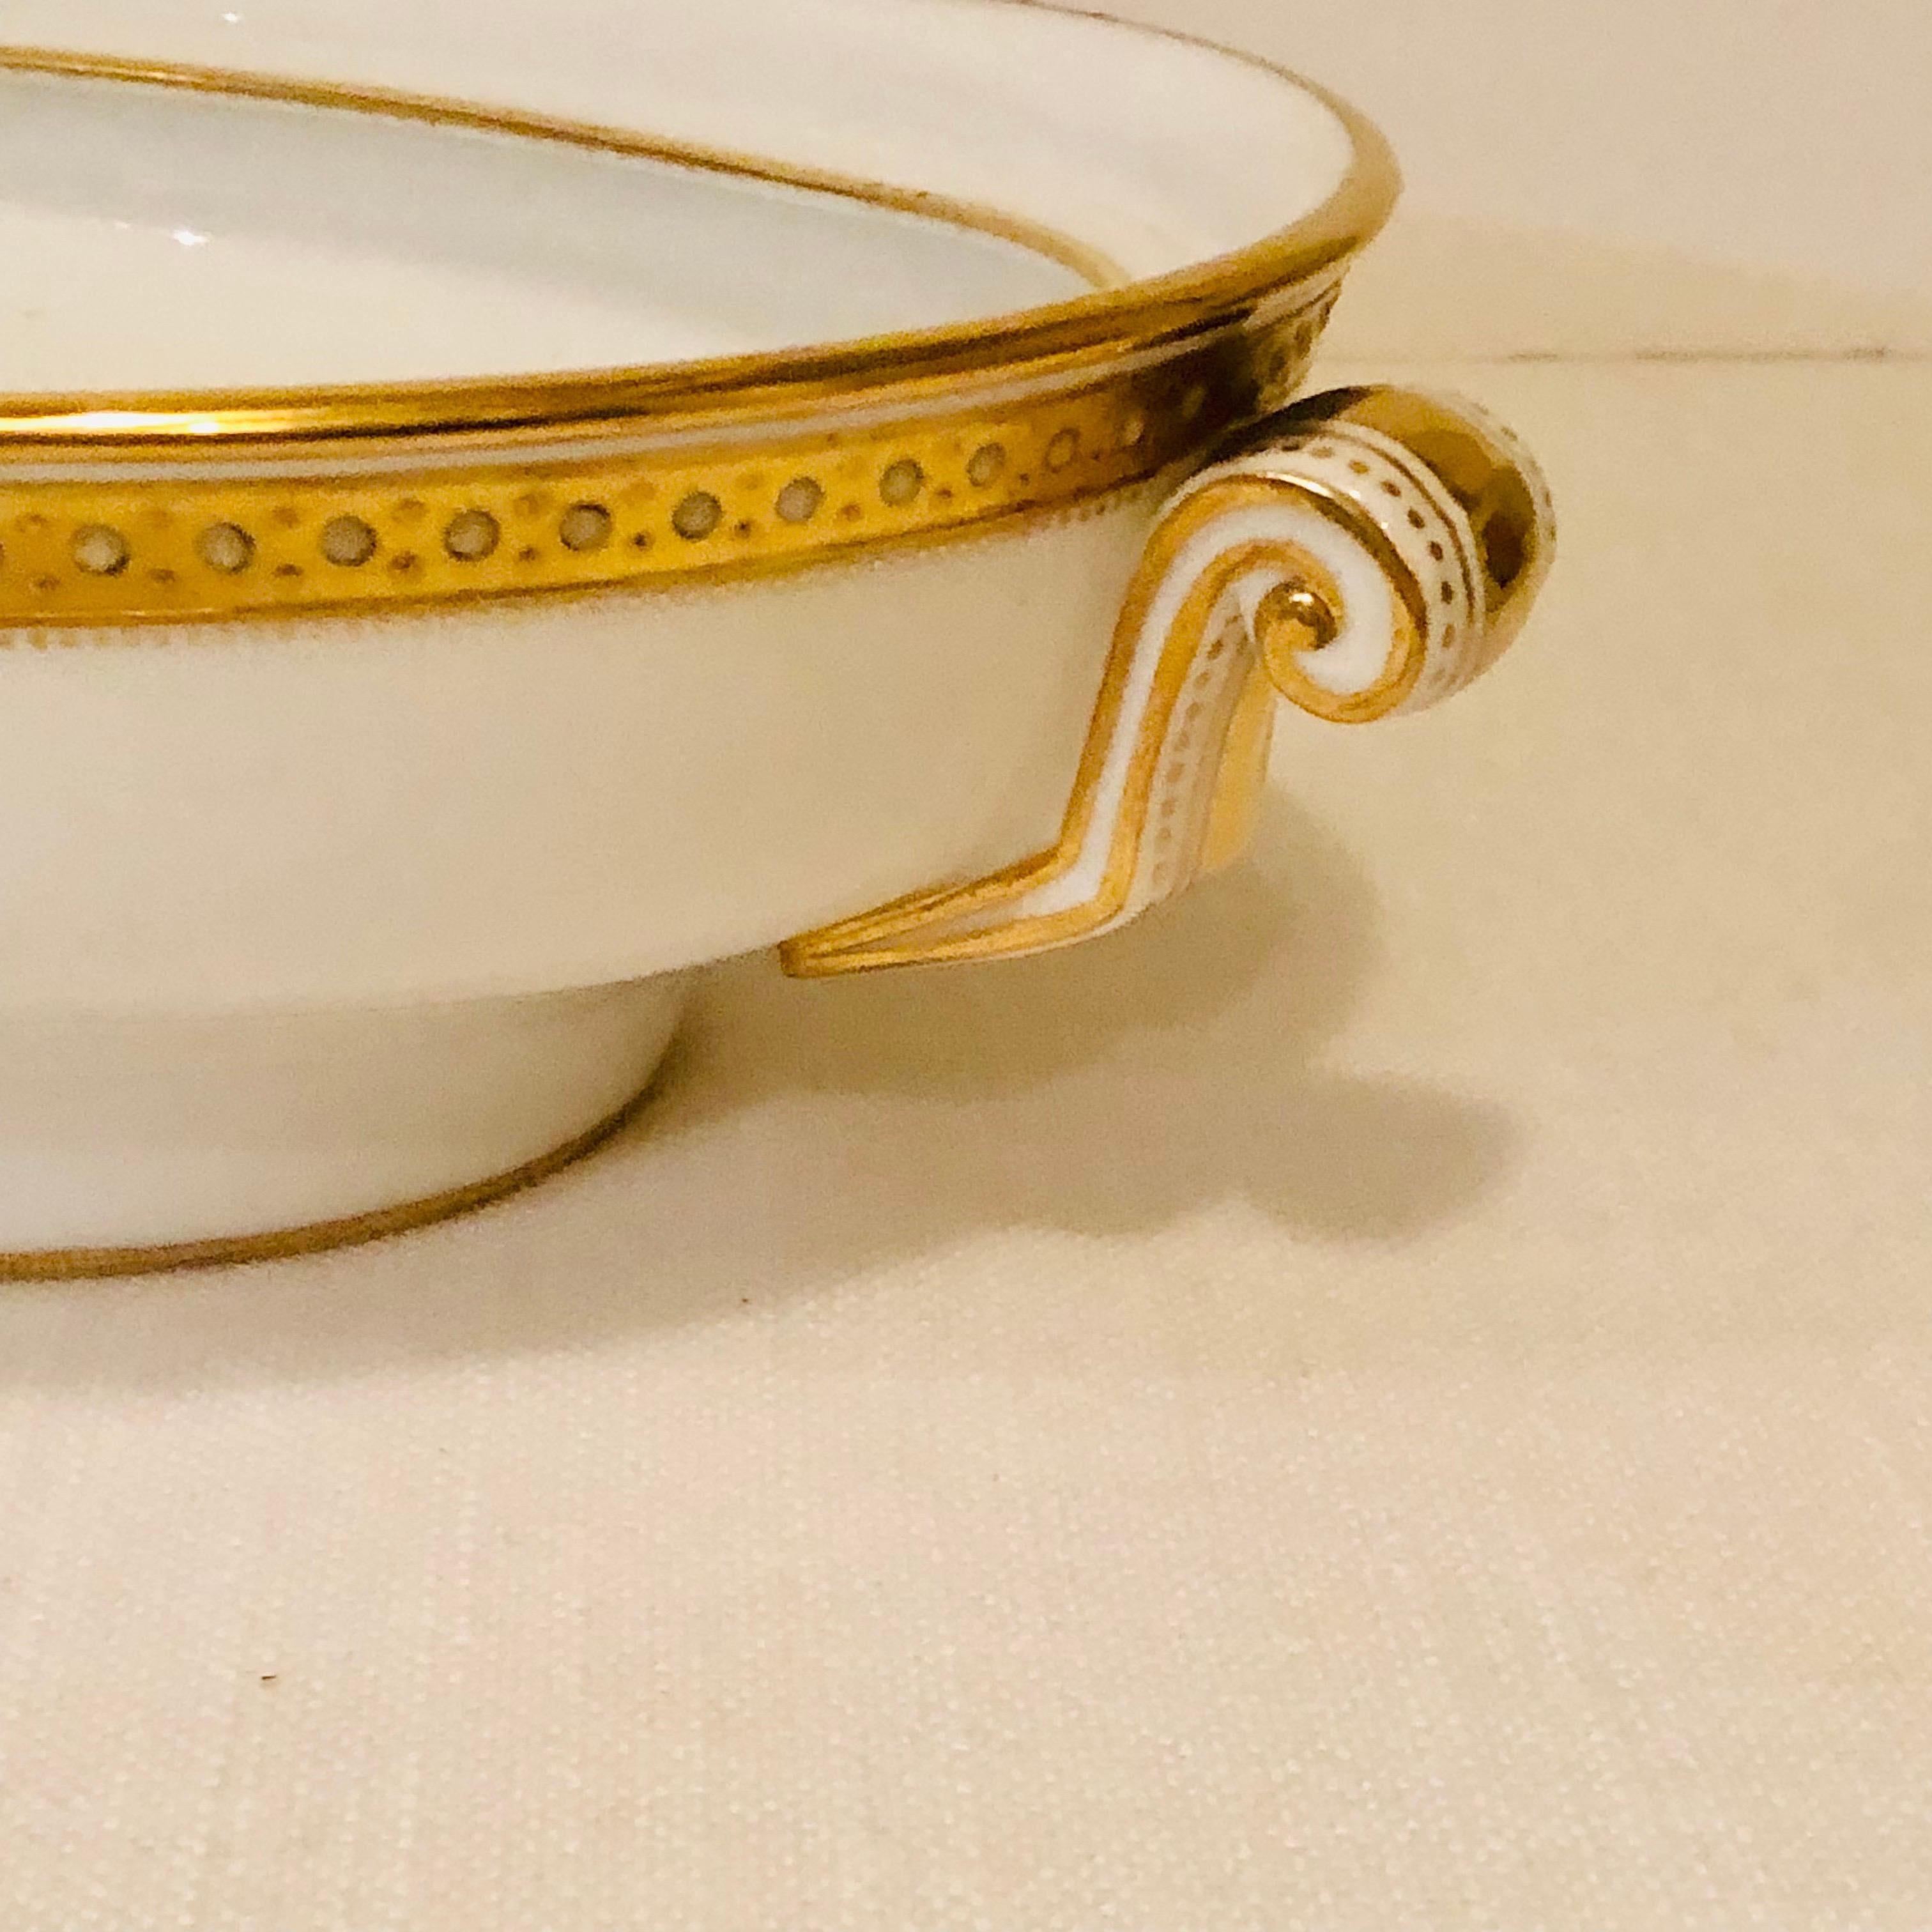 Early 20th Century Copeland Spode Covered Vegetable with Gold Border and Jeweling Made for T. Goode